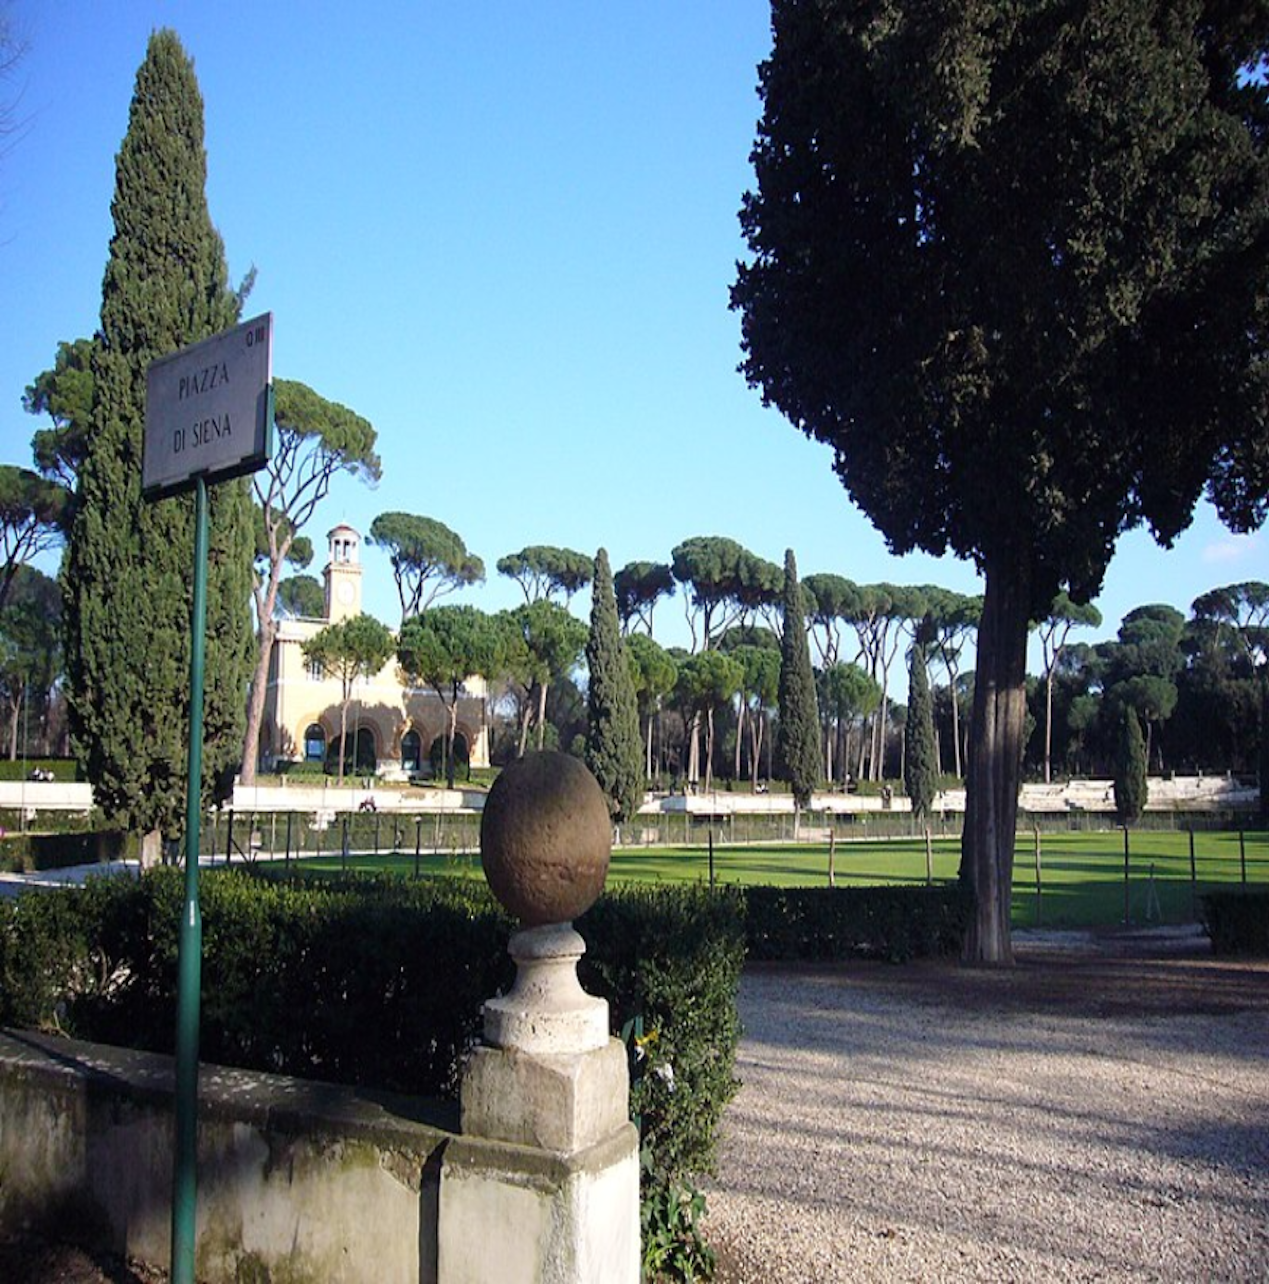 Villa Borghese Gardens and Historic Center by Golf Cart - Accommodations in Rome